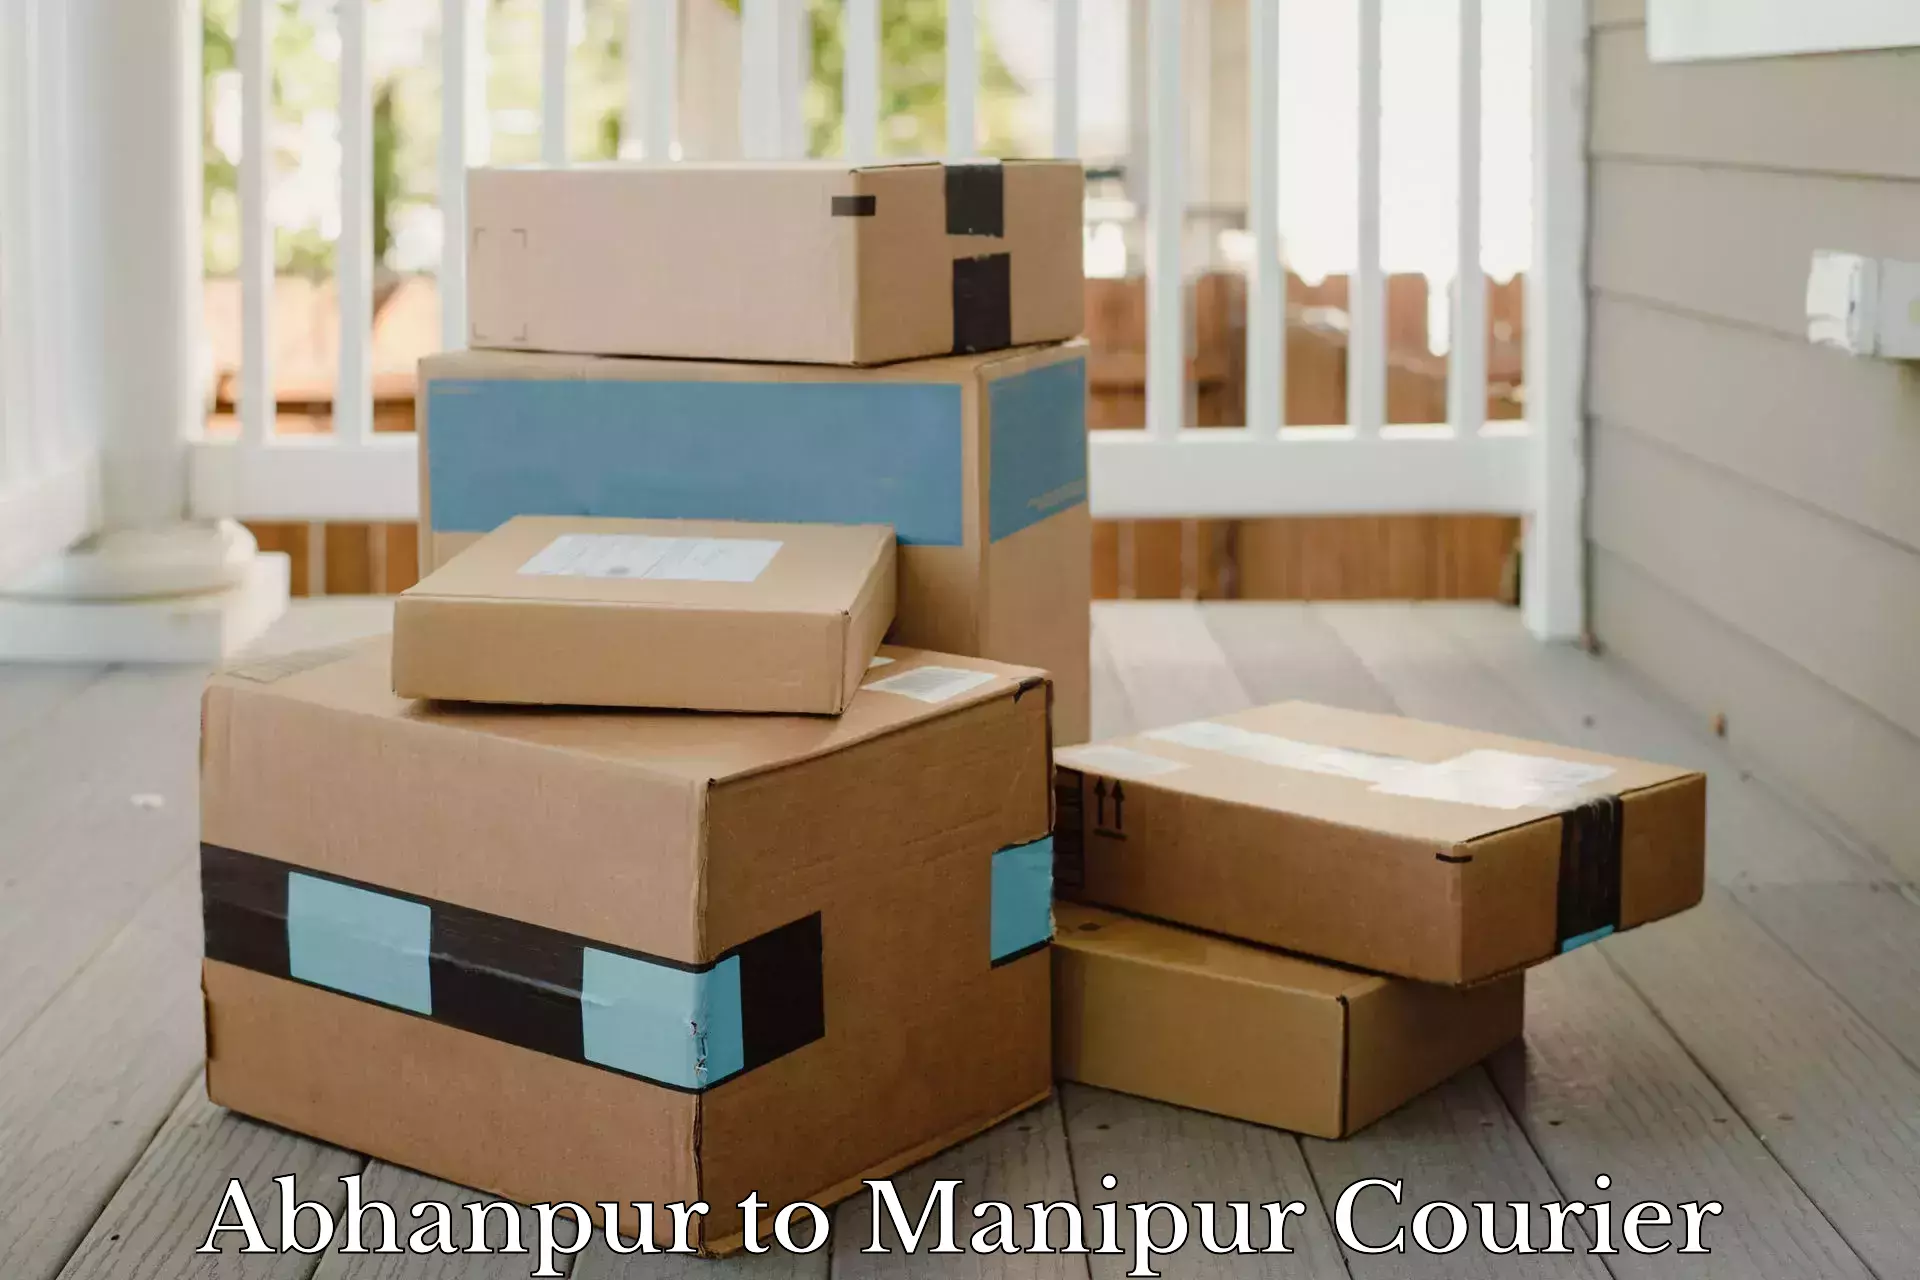 Subscription-based courier Abhanpur to Chandel